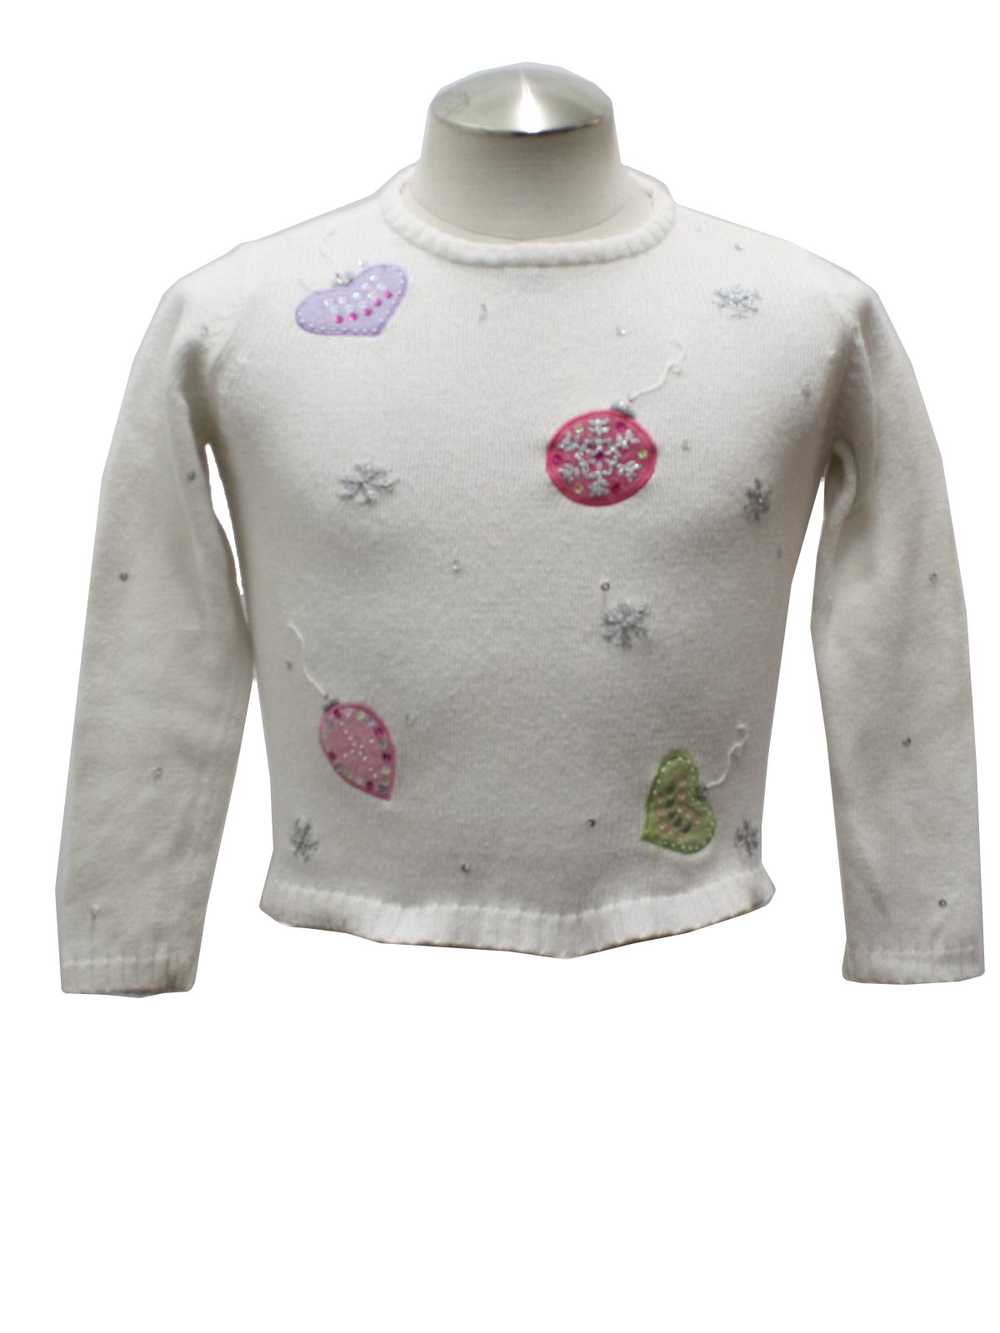 Womens/Childs Ugly Christmas Sweater - image 1